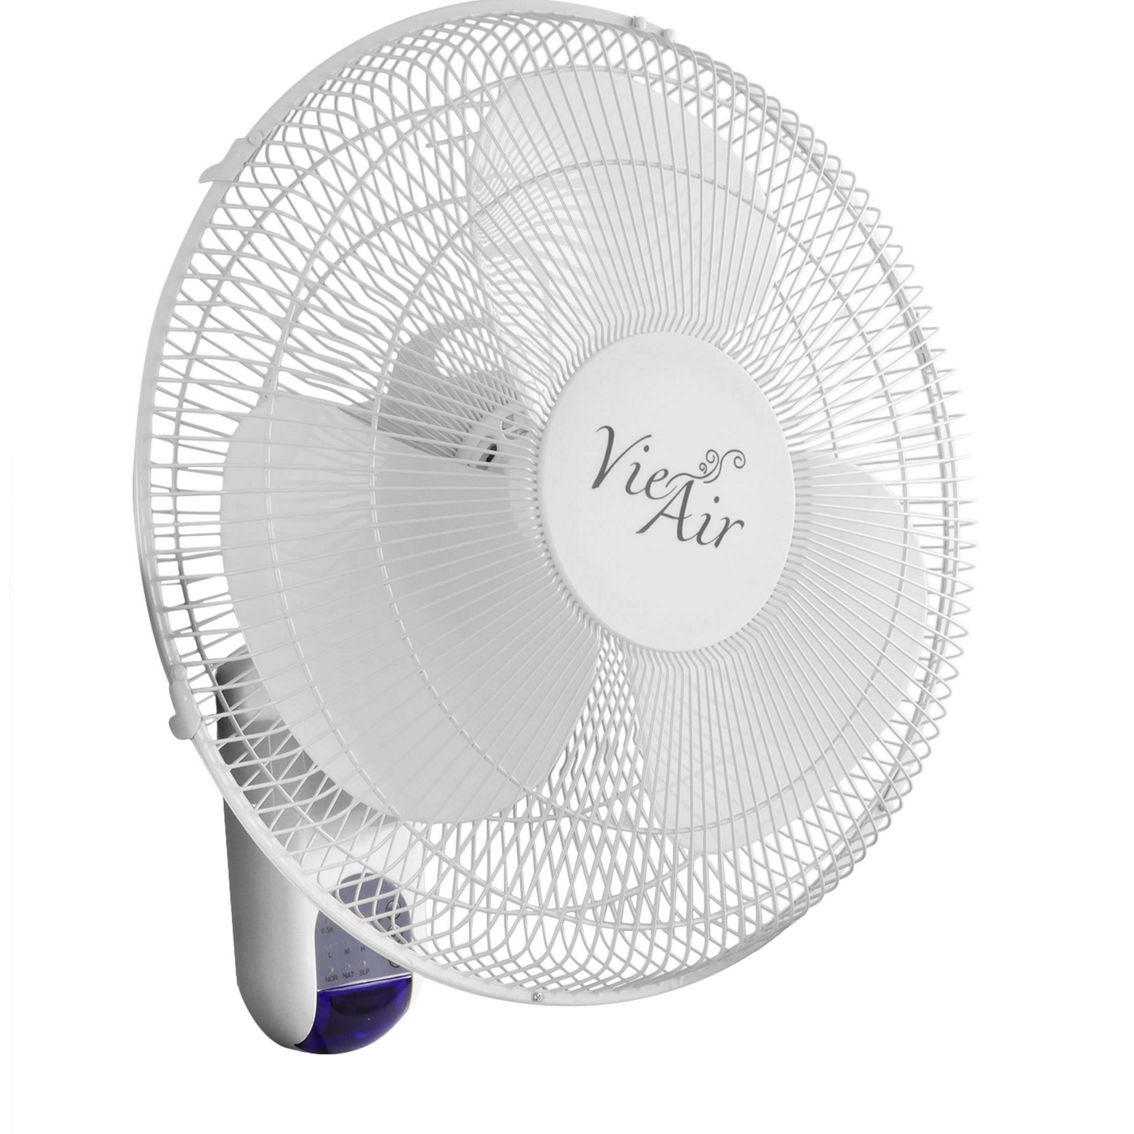 Vie Air 16 Inch 3 Speed Plastic Wall Fan with Remote Control in White - Image 3 of 5